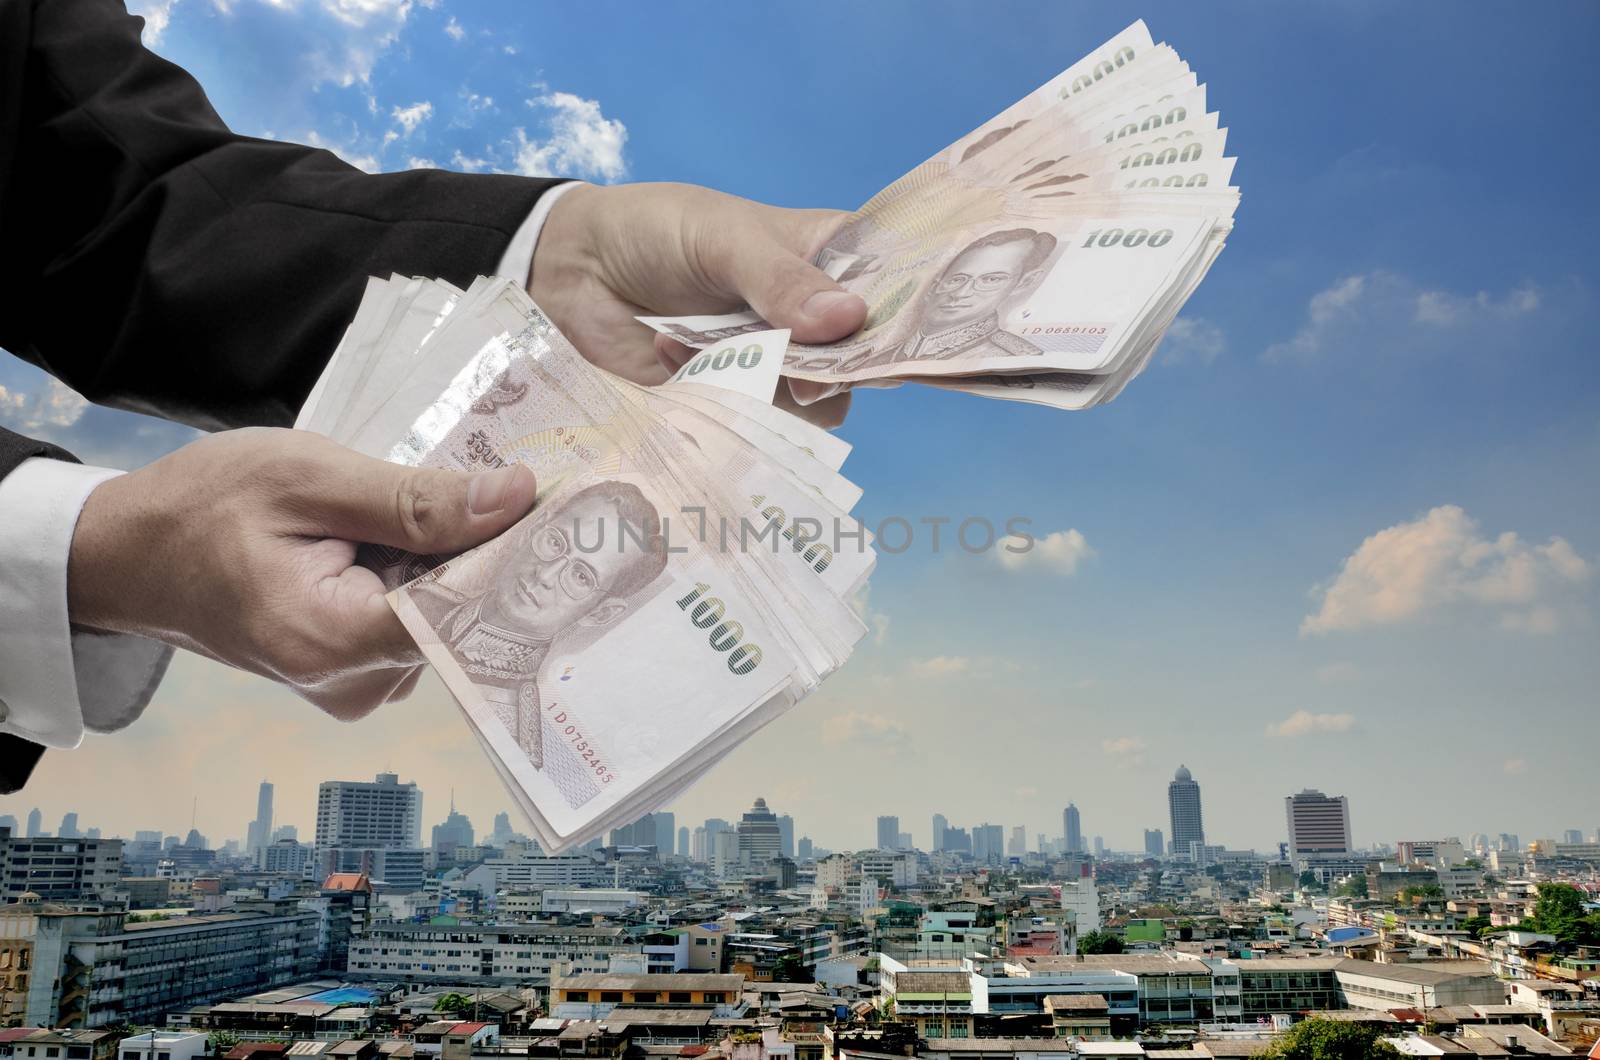 Economic capital injection concept, Businessman invest in capital by pixbox77